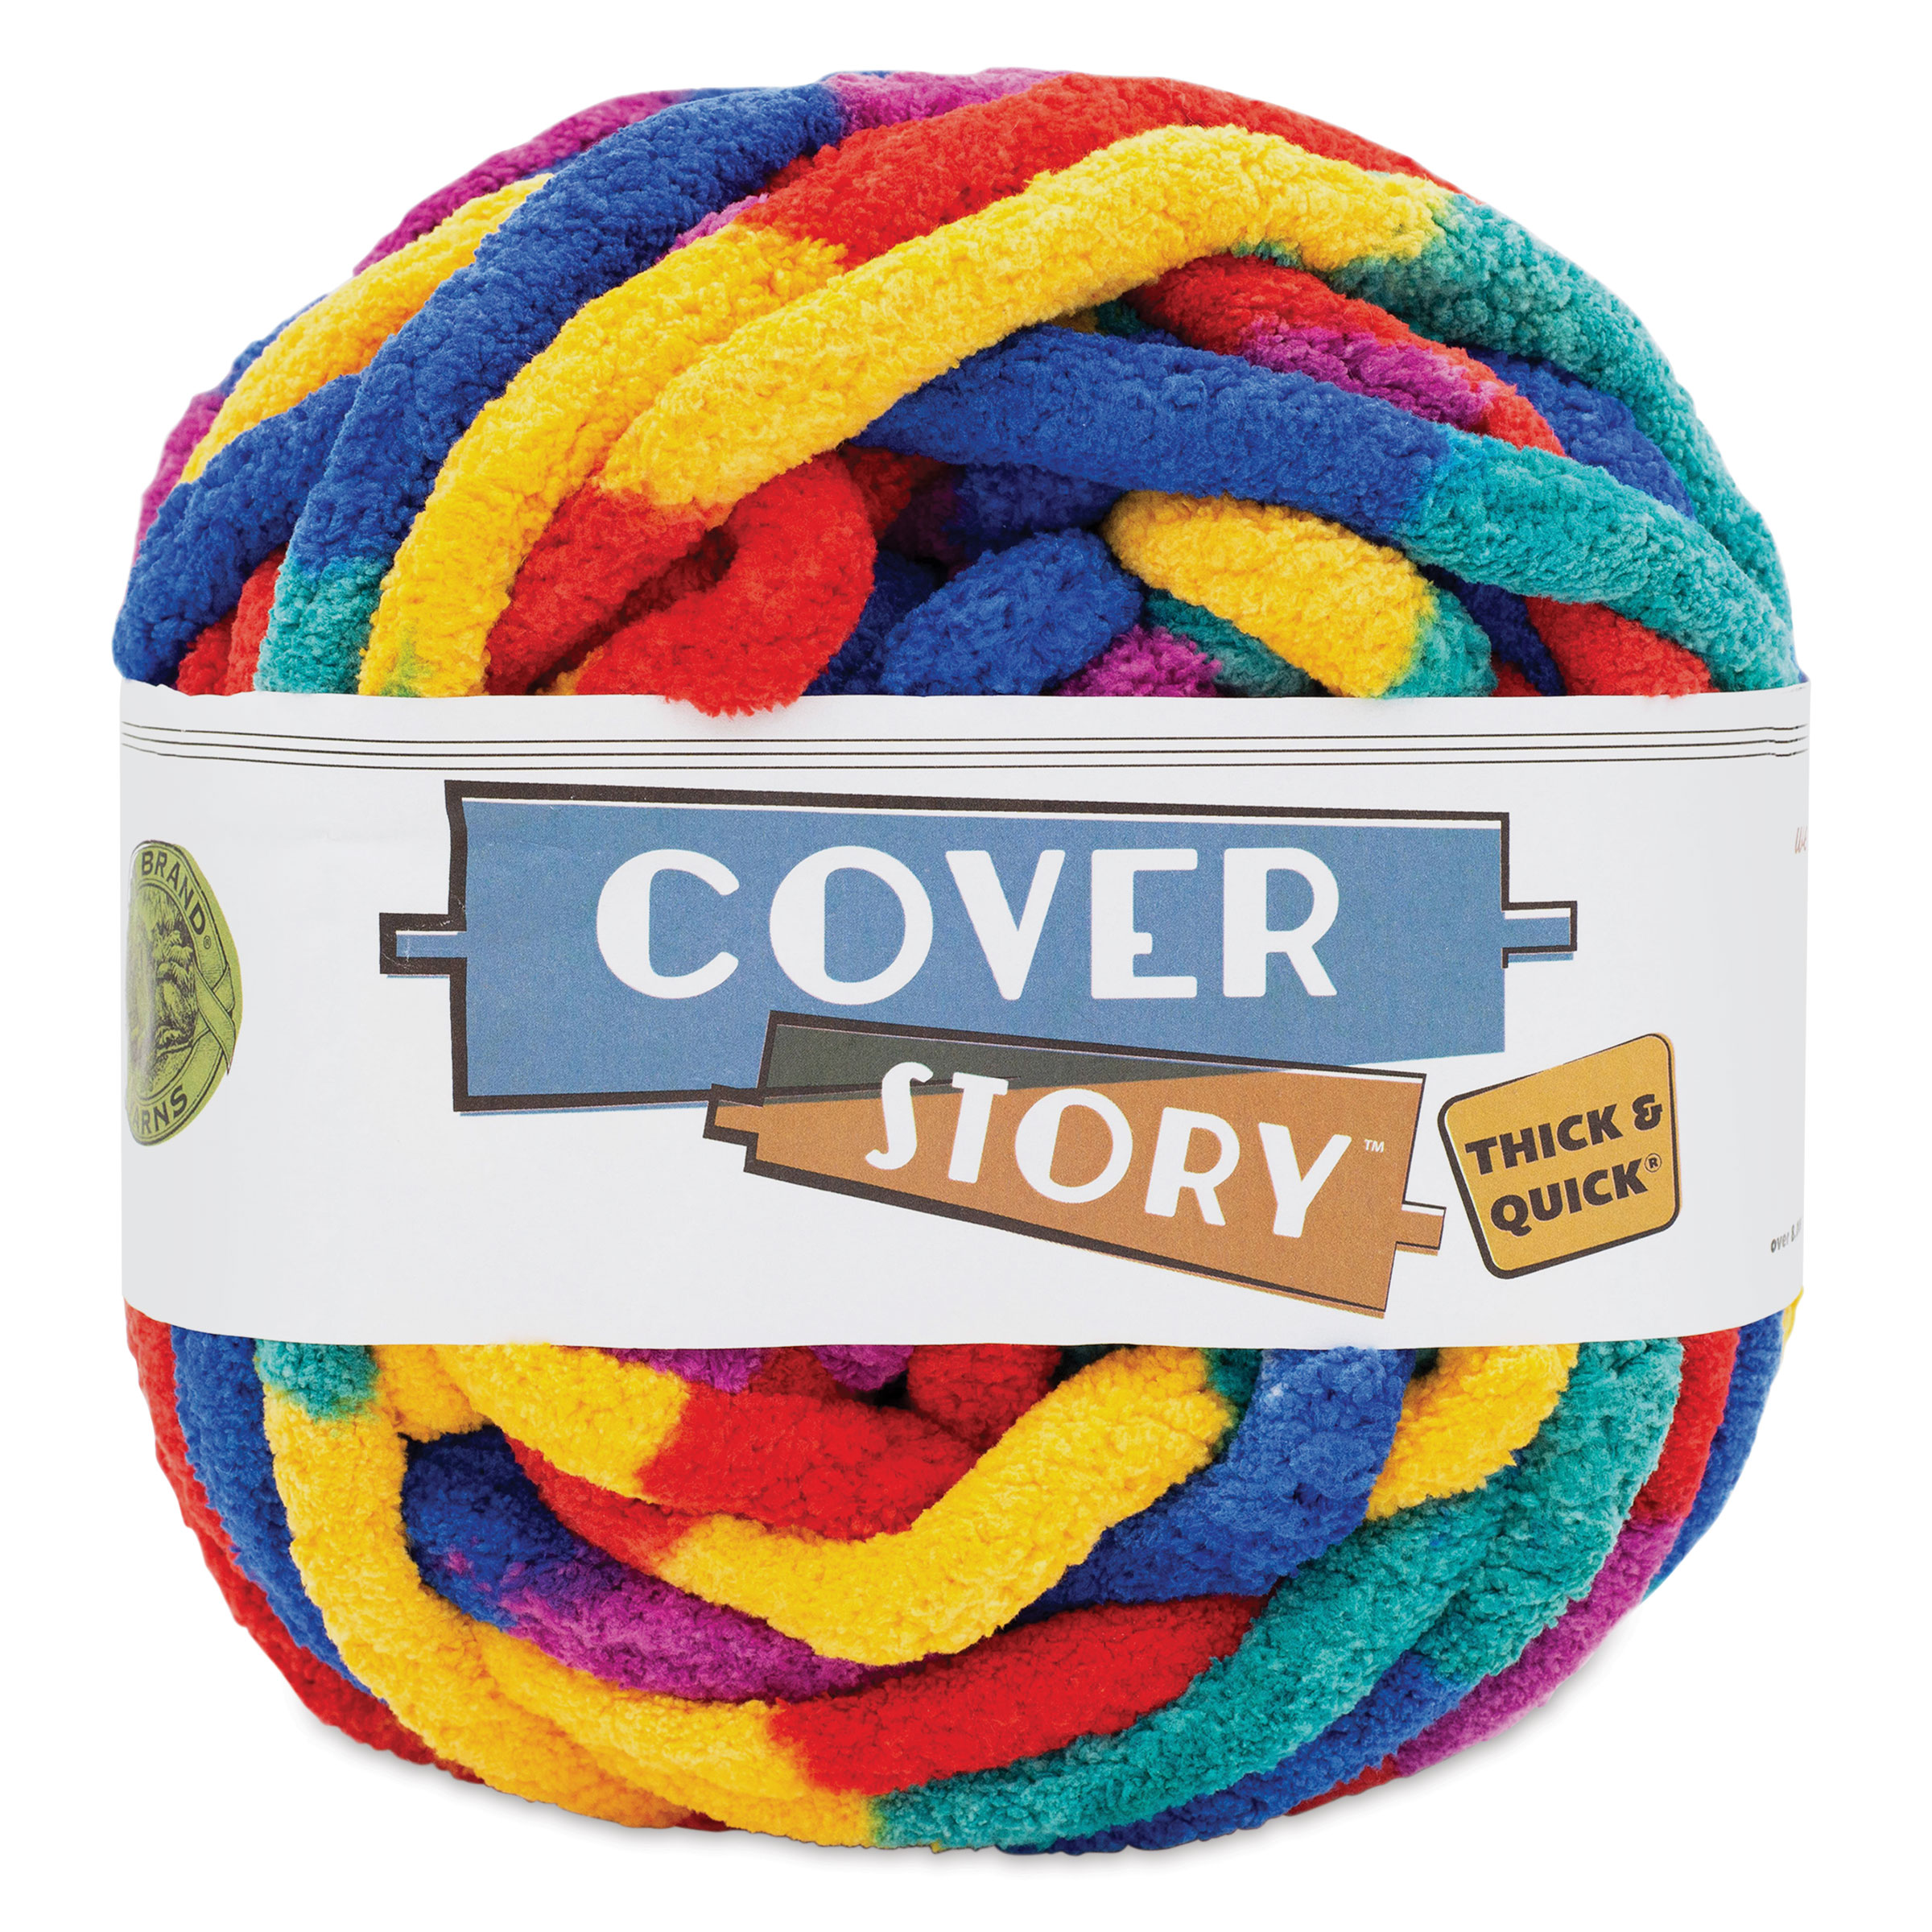 Lion Brand Cover Story Thick & Quick Yarn - Tropical, 39 Yards